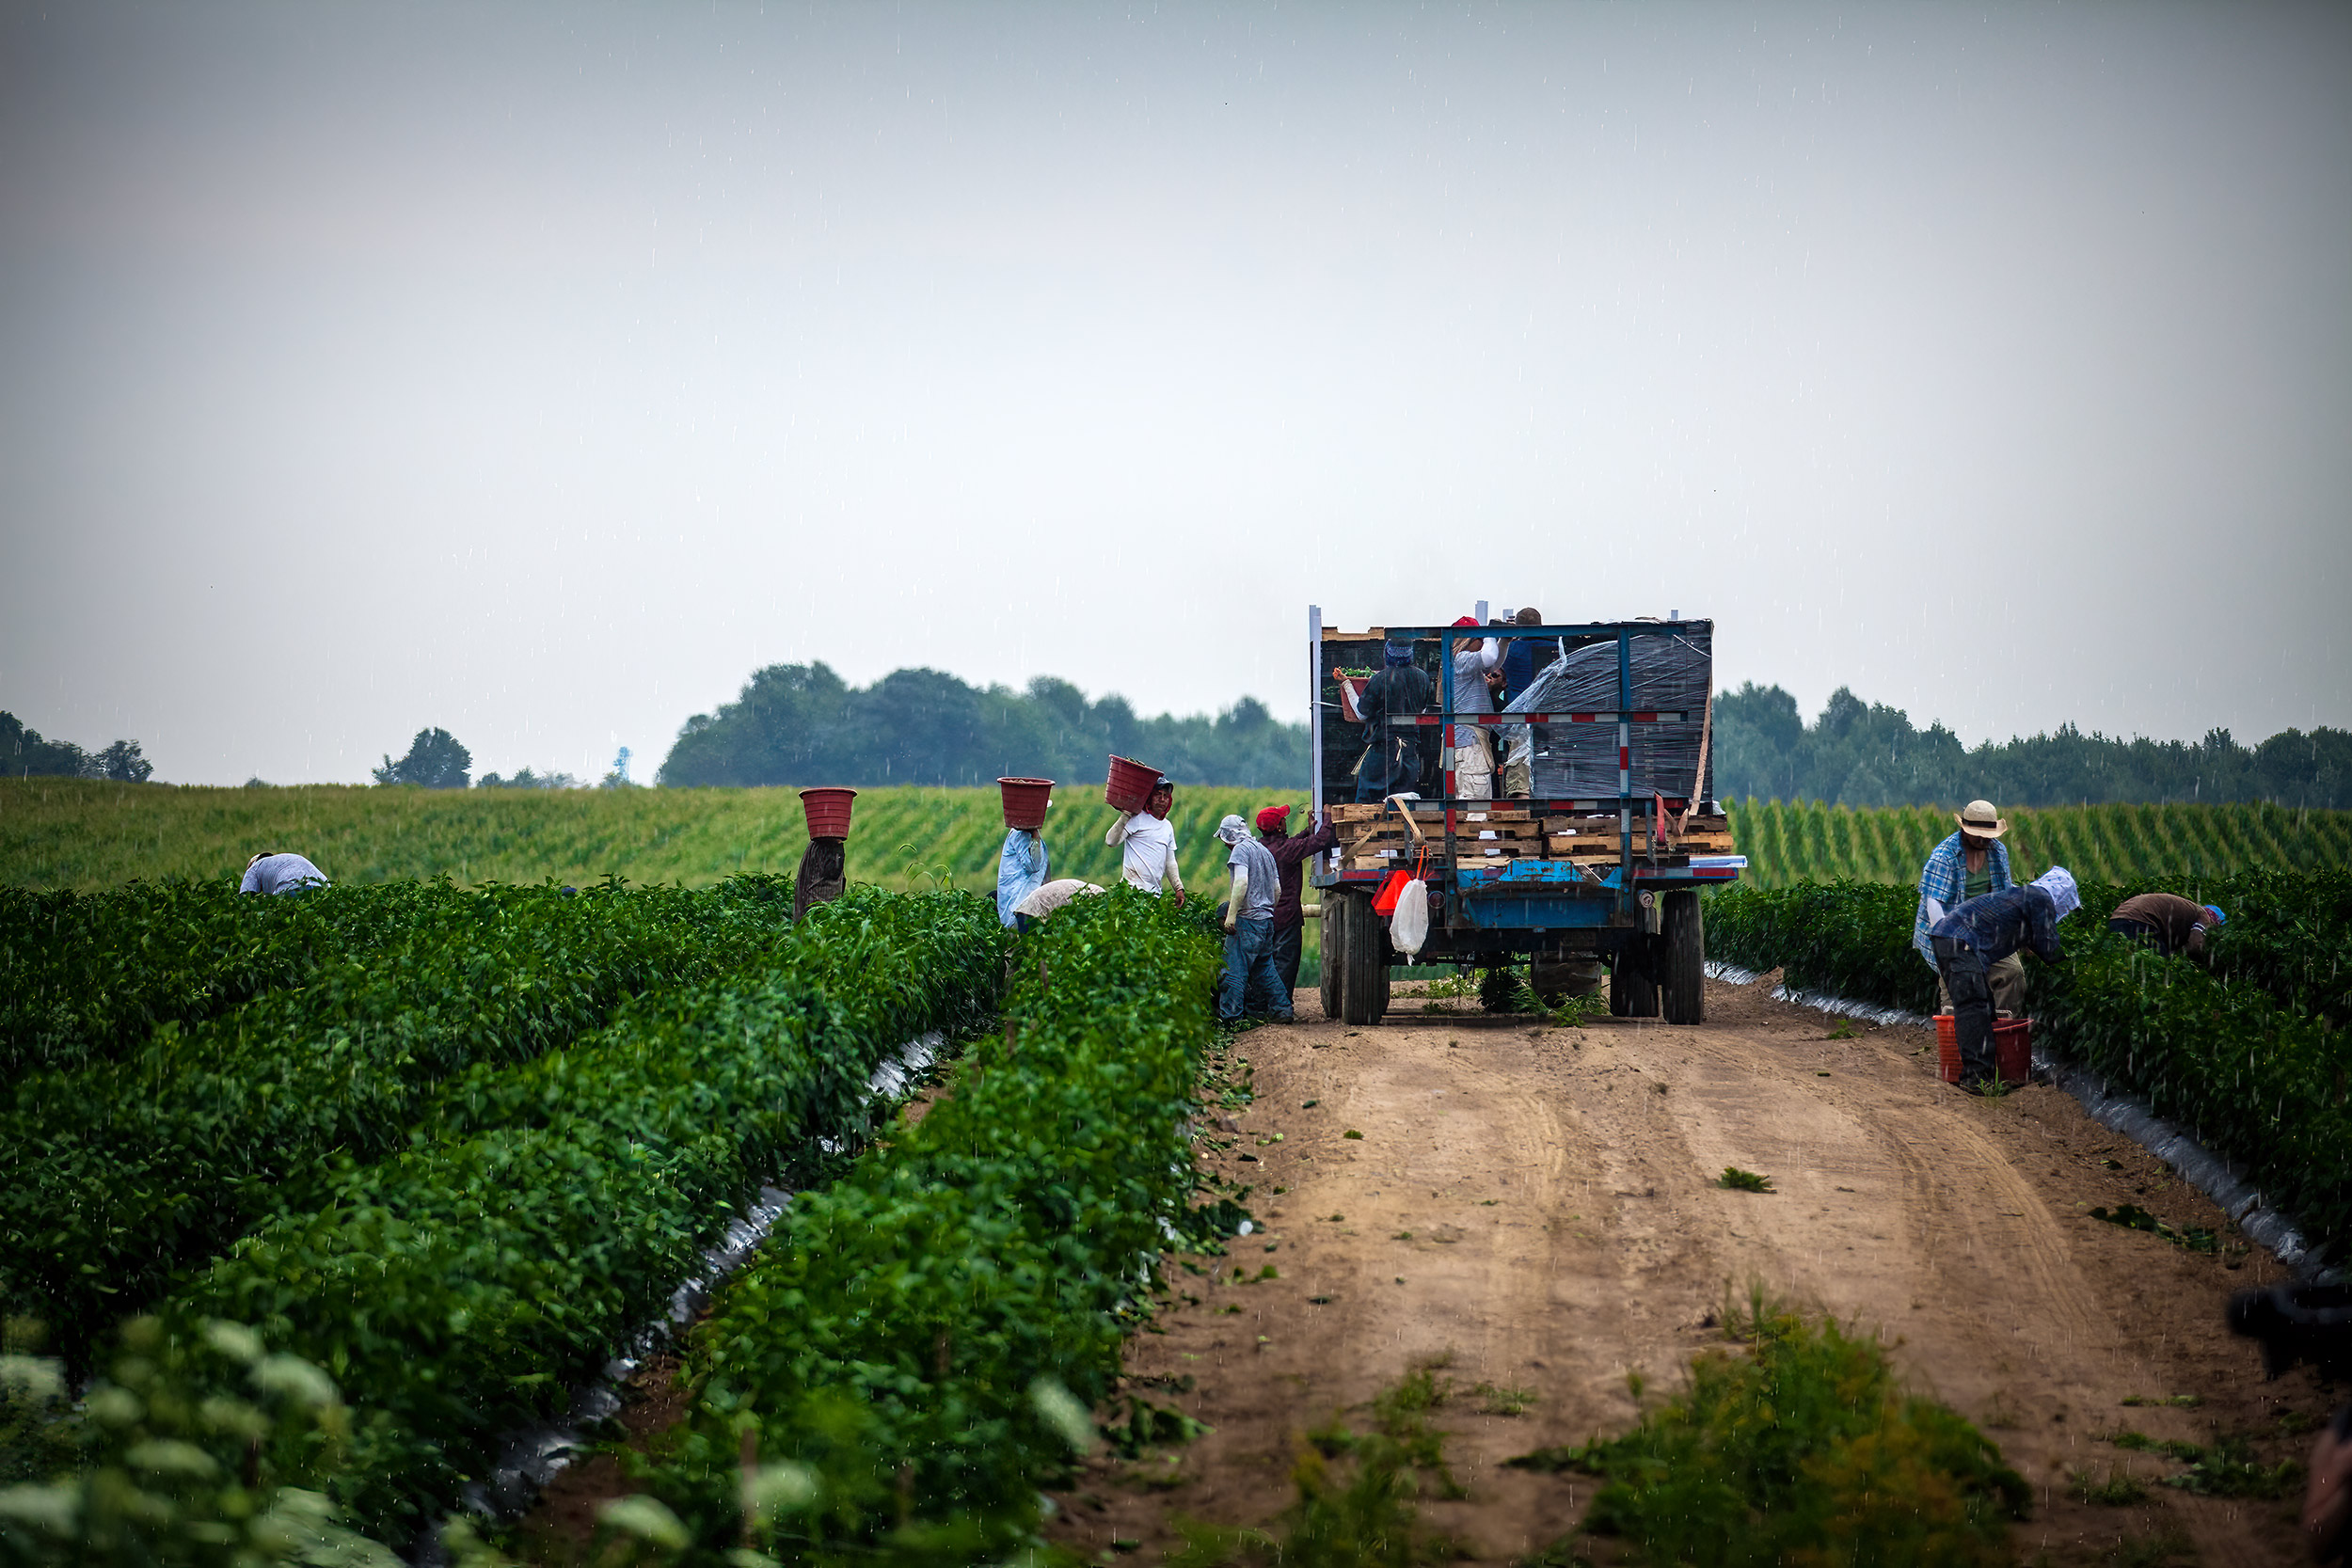 Crop pickers loading jalapeno baskets onto the harvest truck. agriculture photography 